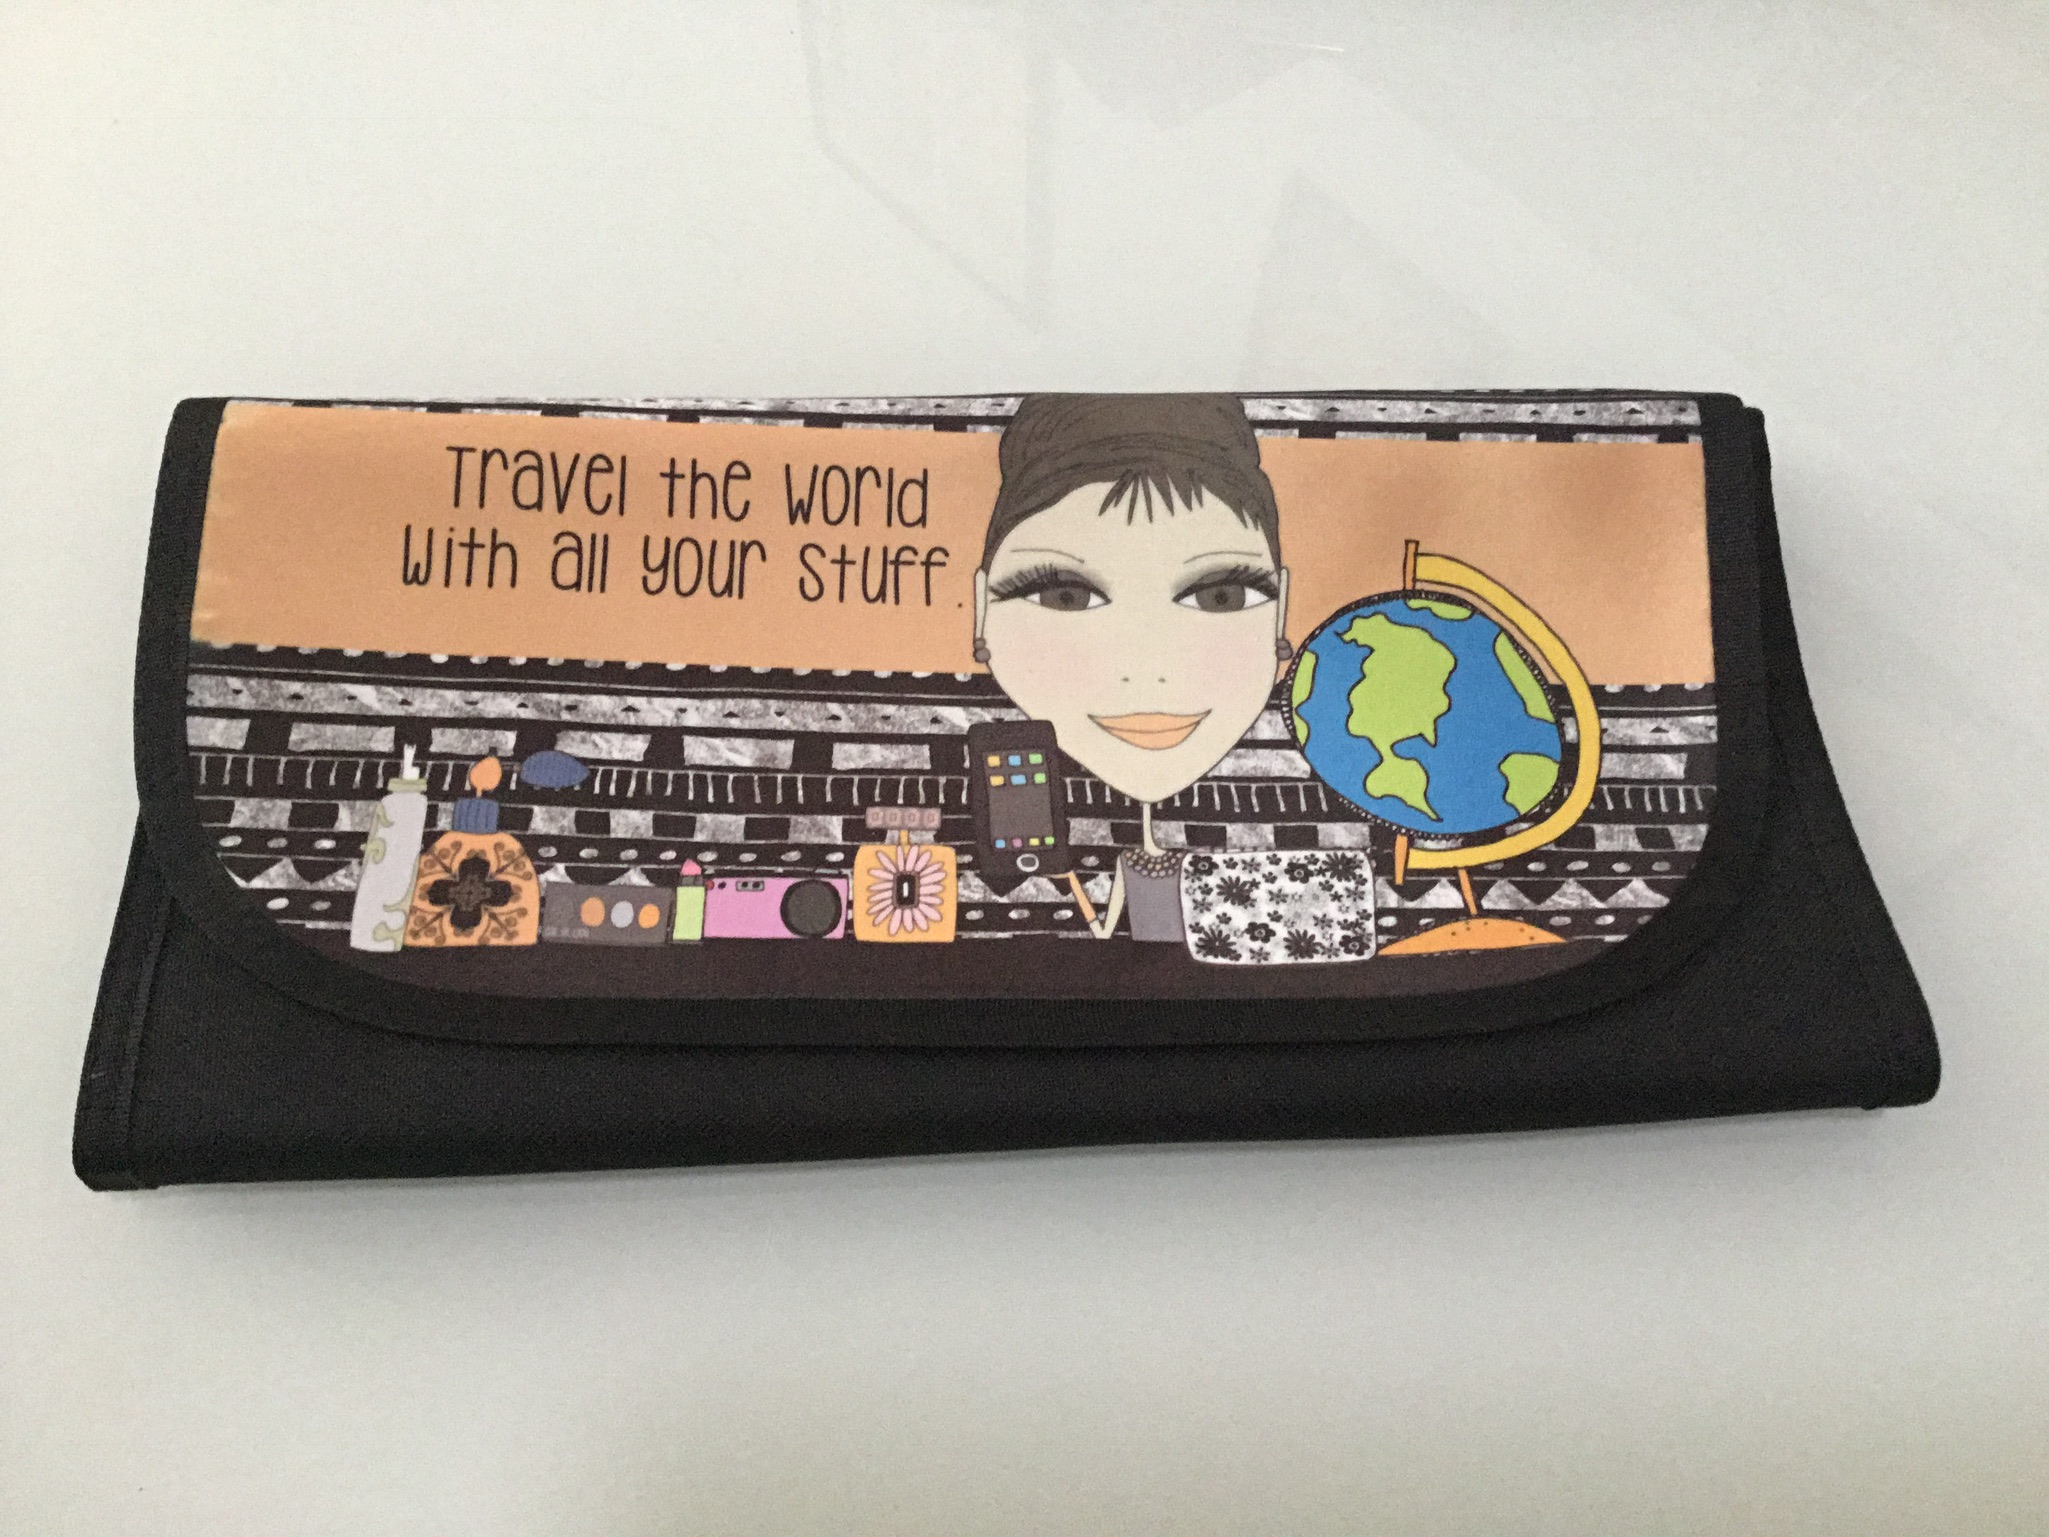 Travel Bag made with sublimation printing